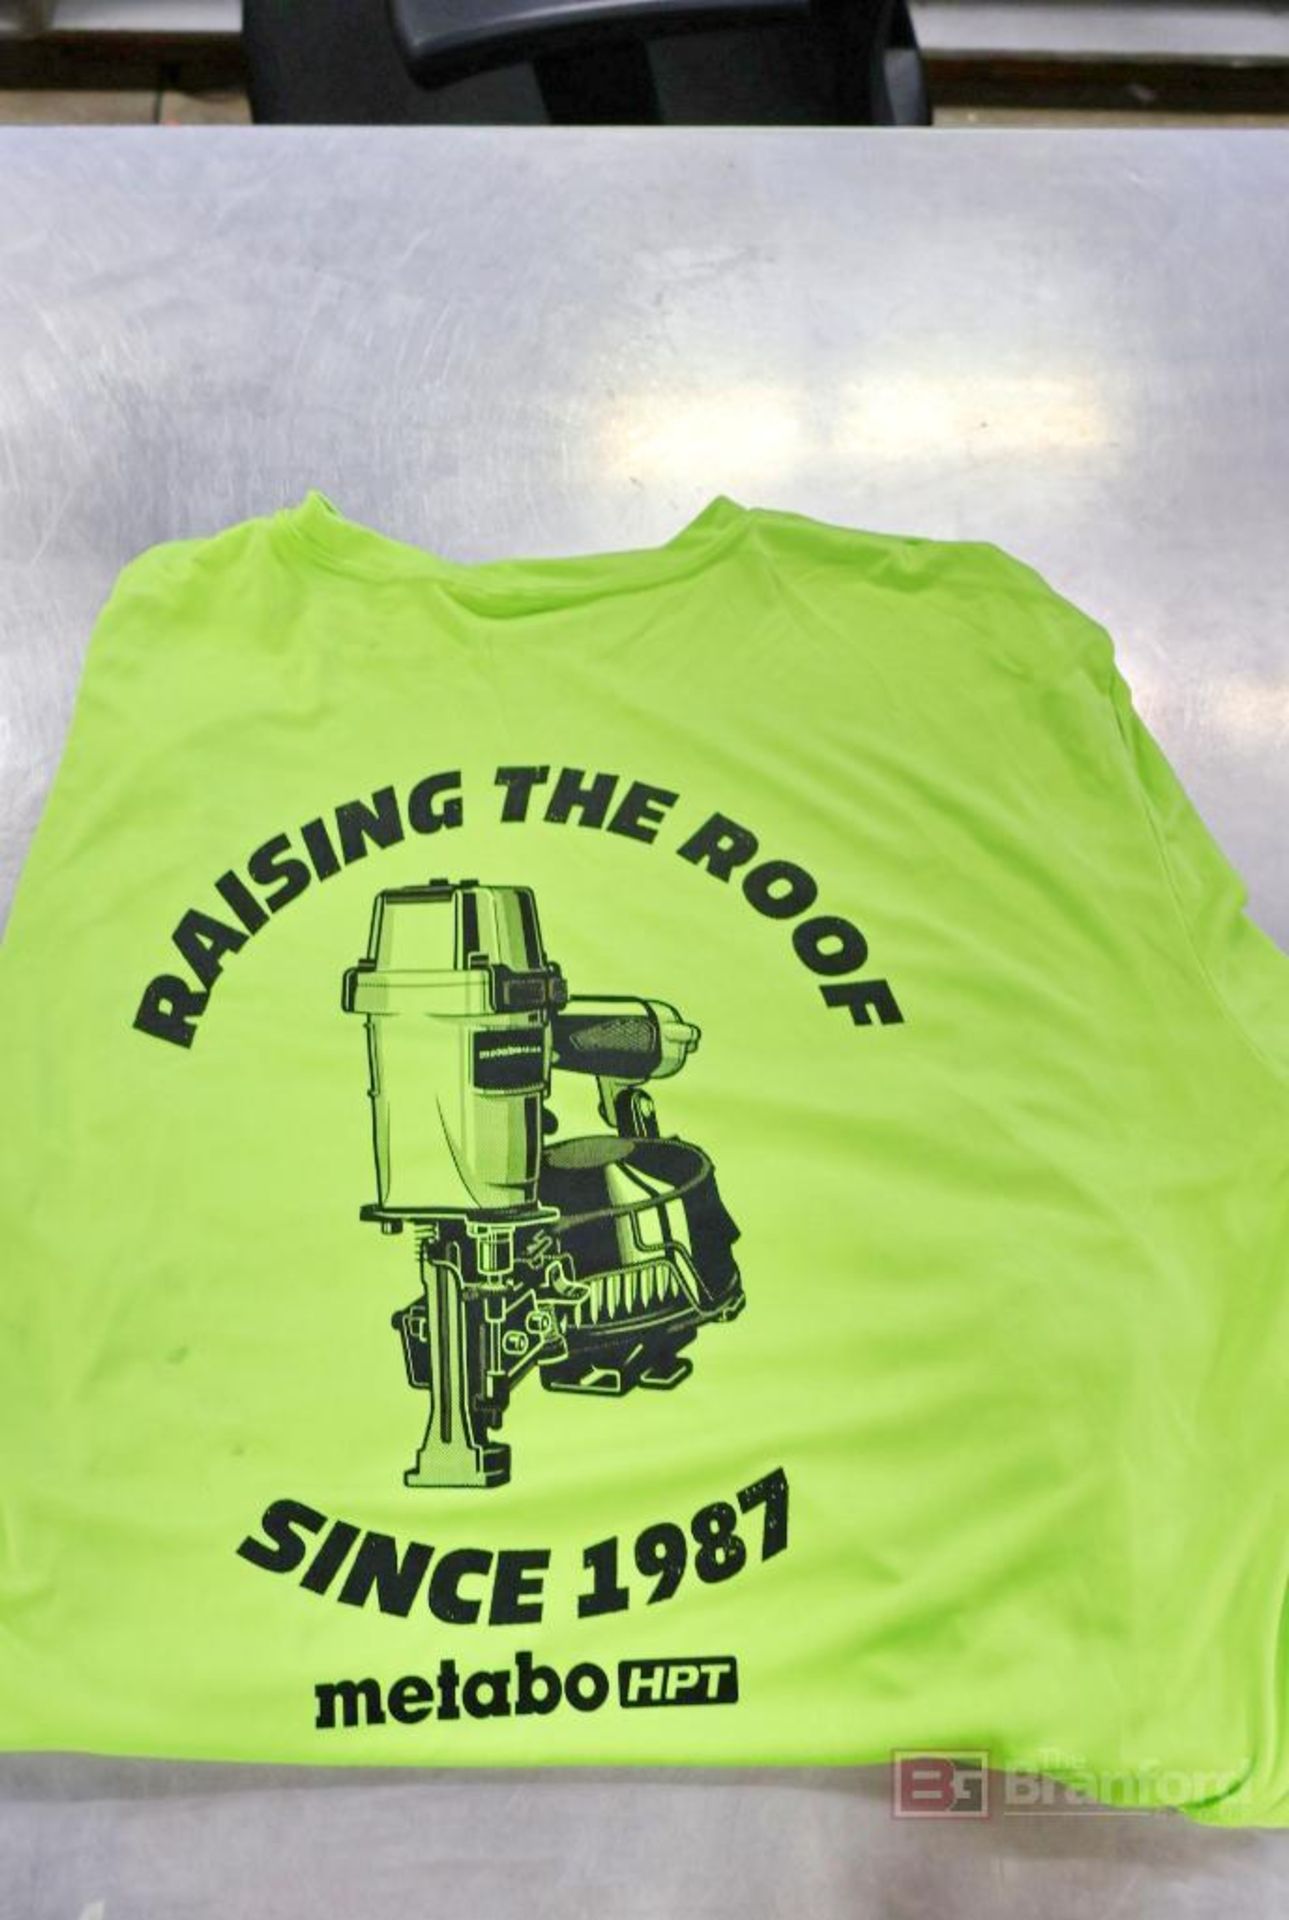 Box Lot of Metabo Raising The Roof T-Shirts - Image 3 of 3